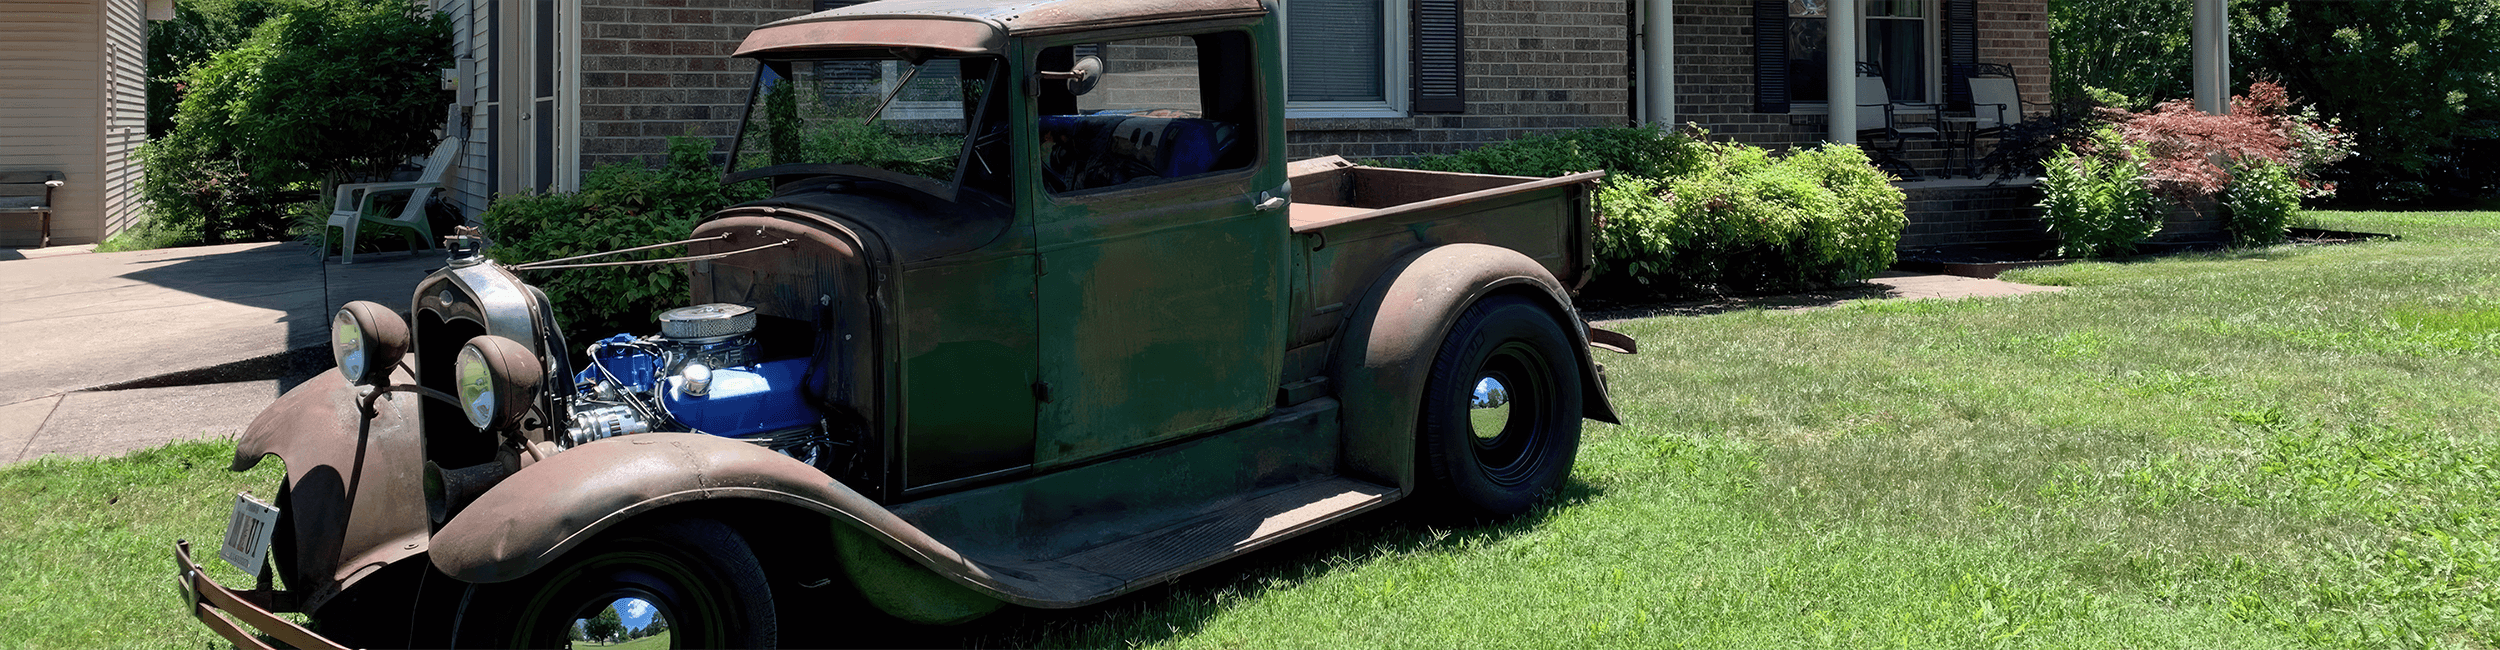 1931 Ford Truck Powered by a BluePrint Engines' 302 c.i.